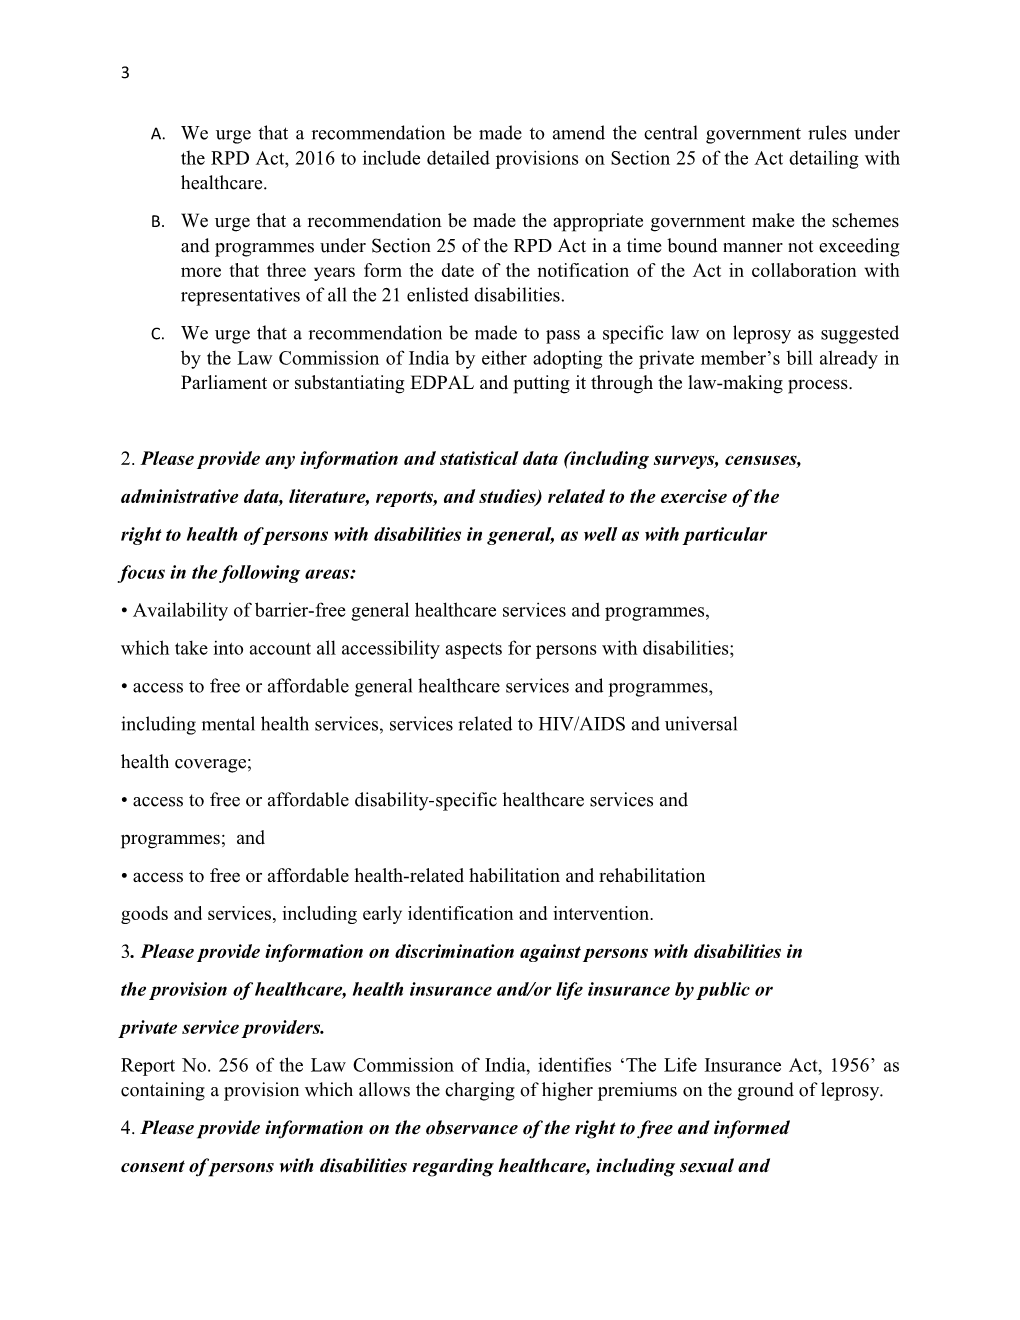 Questionnaire on the Right of Persons with Disabilities to the Highest Attainable